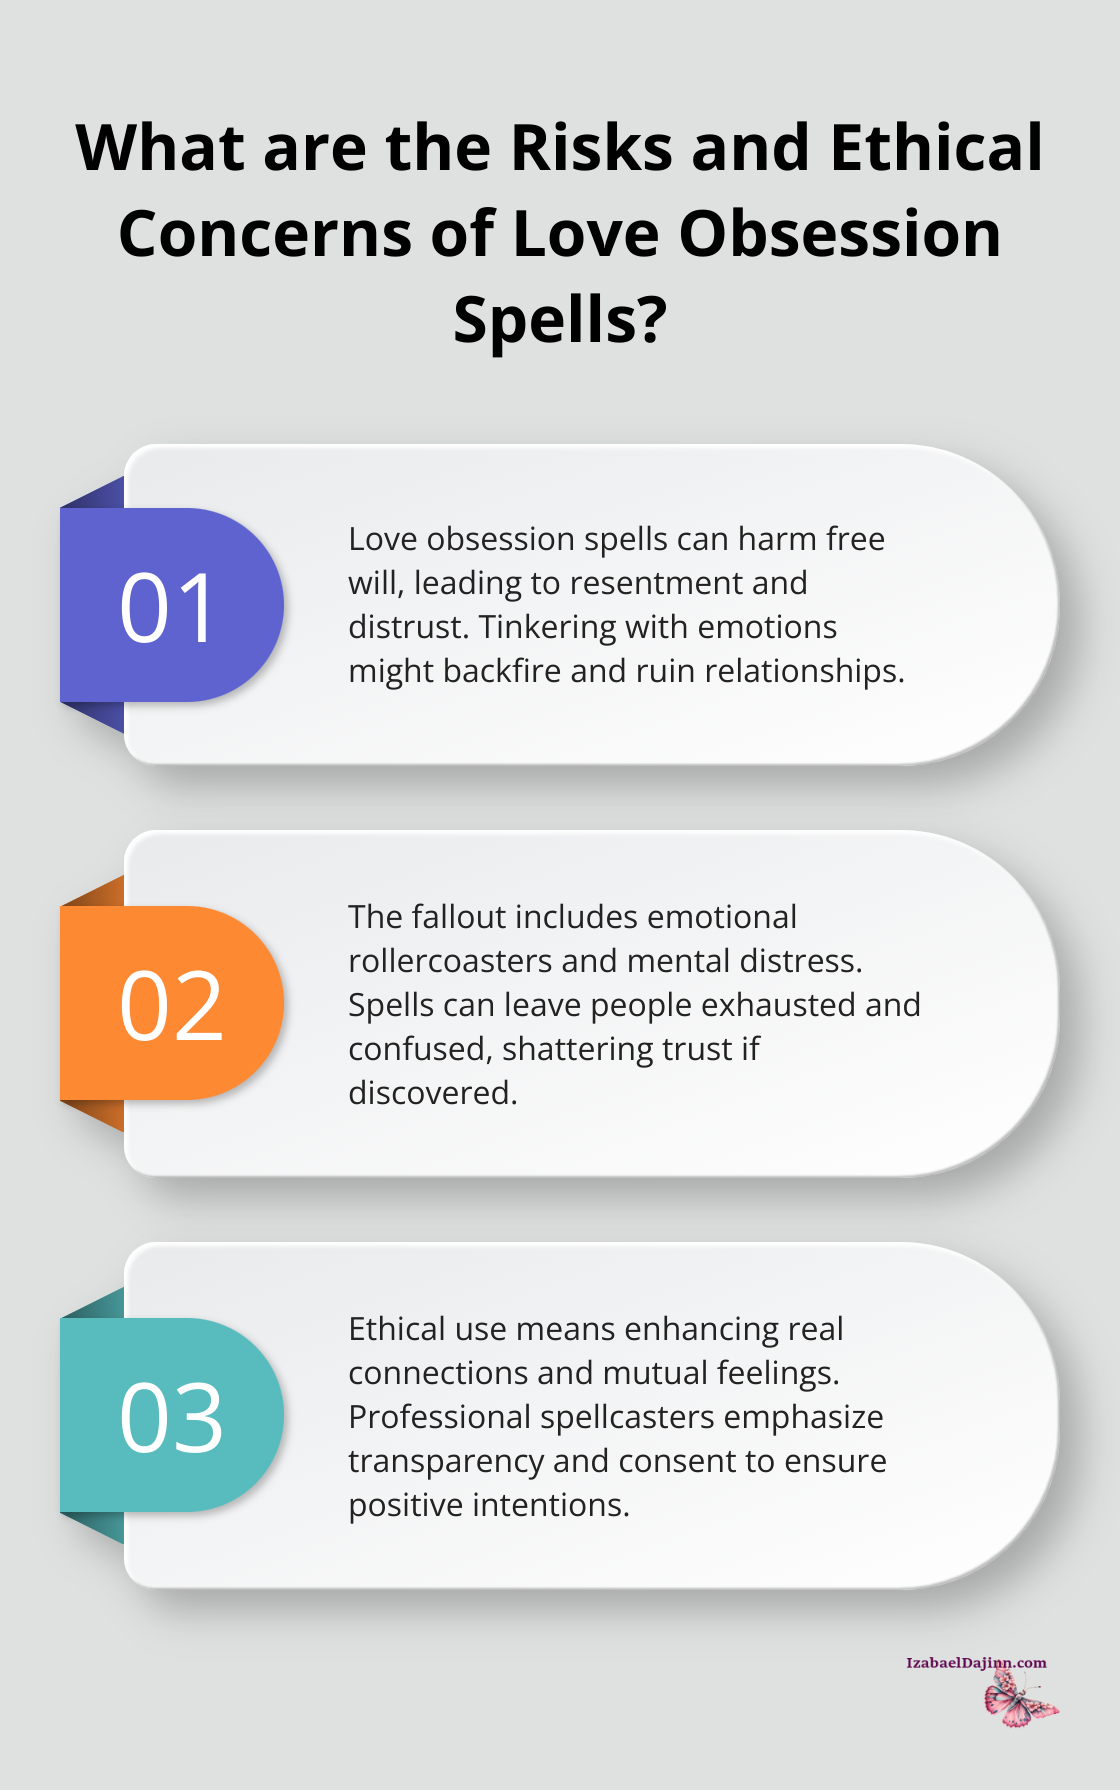 Fact - What are the Risks and Ethical Concerns of Love Obsession Spells?